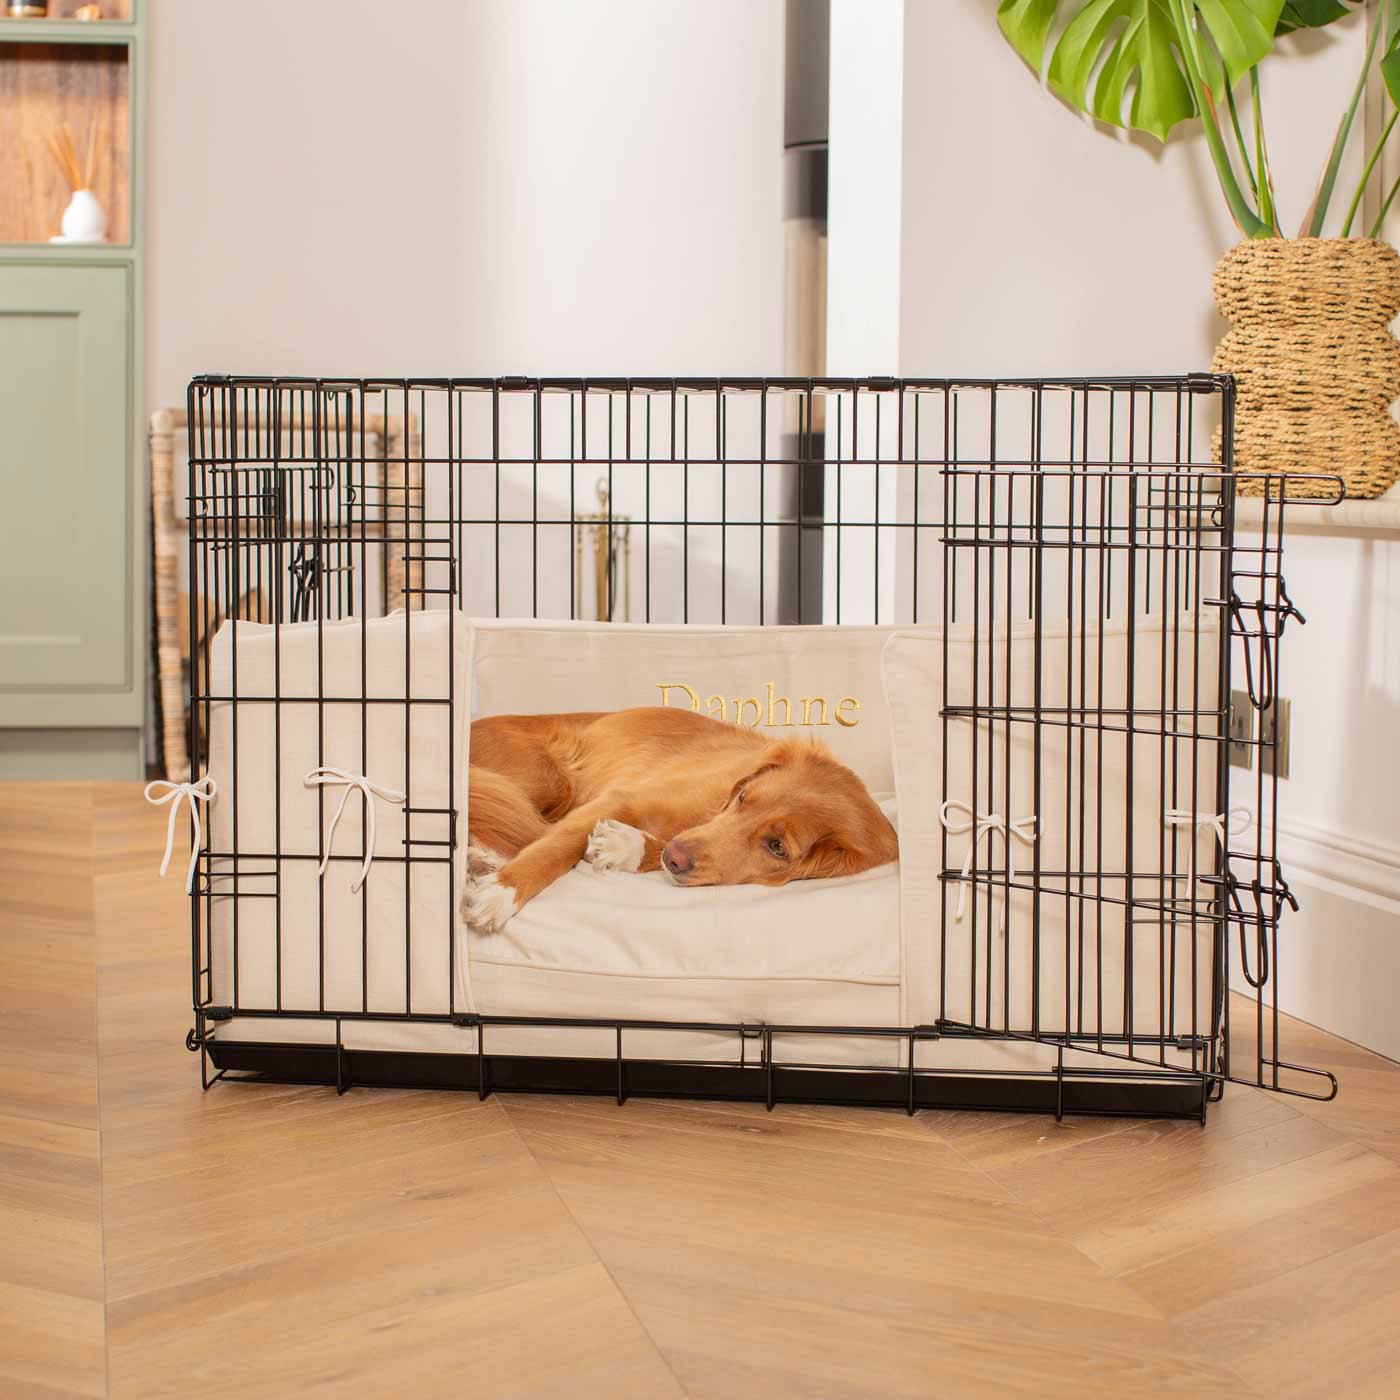 Luxury Dog Cage Bumper, Savanna Bone Cage Bumper Cover The Perfect Dog Cage Accessory, Available To Personalize Now at Lords & Labradors US